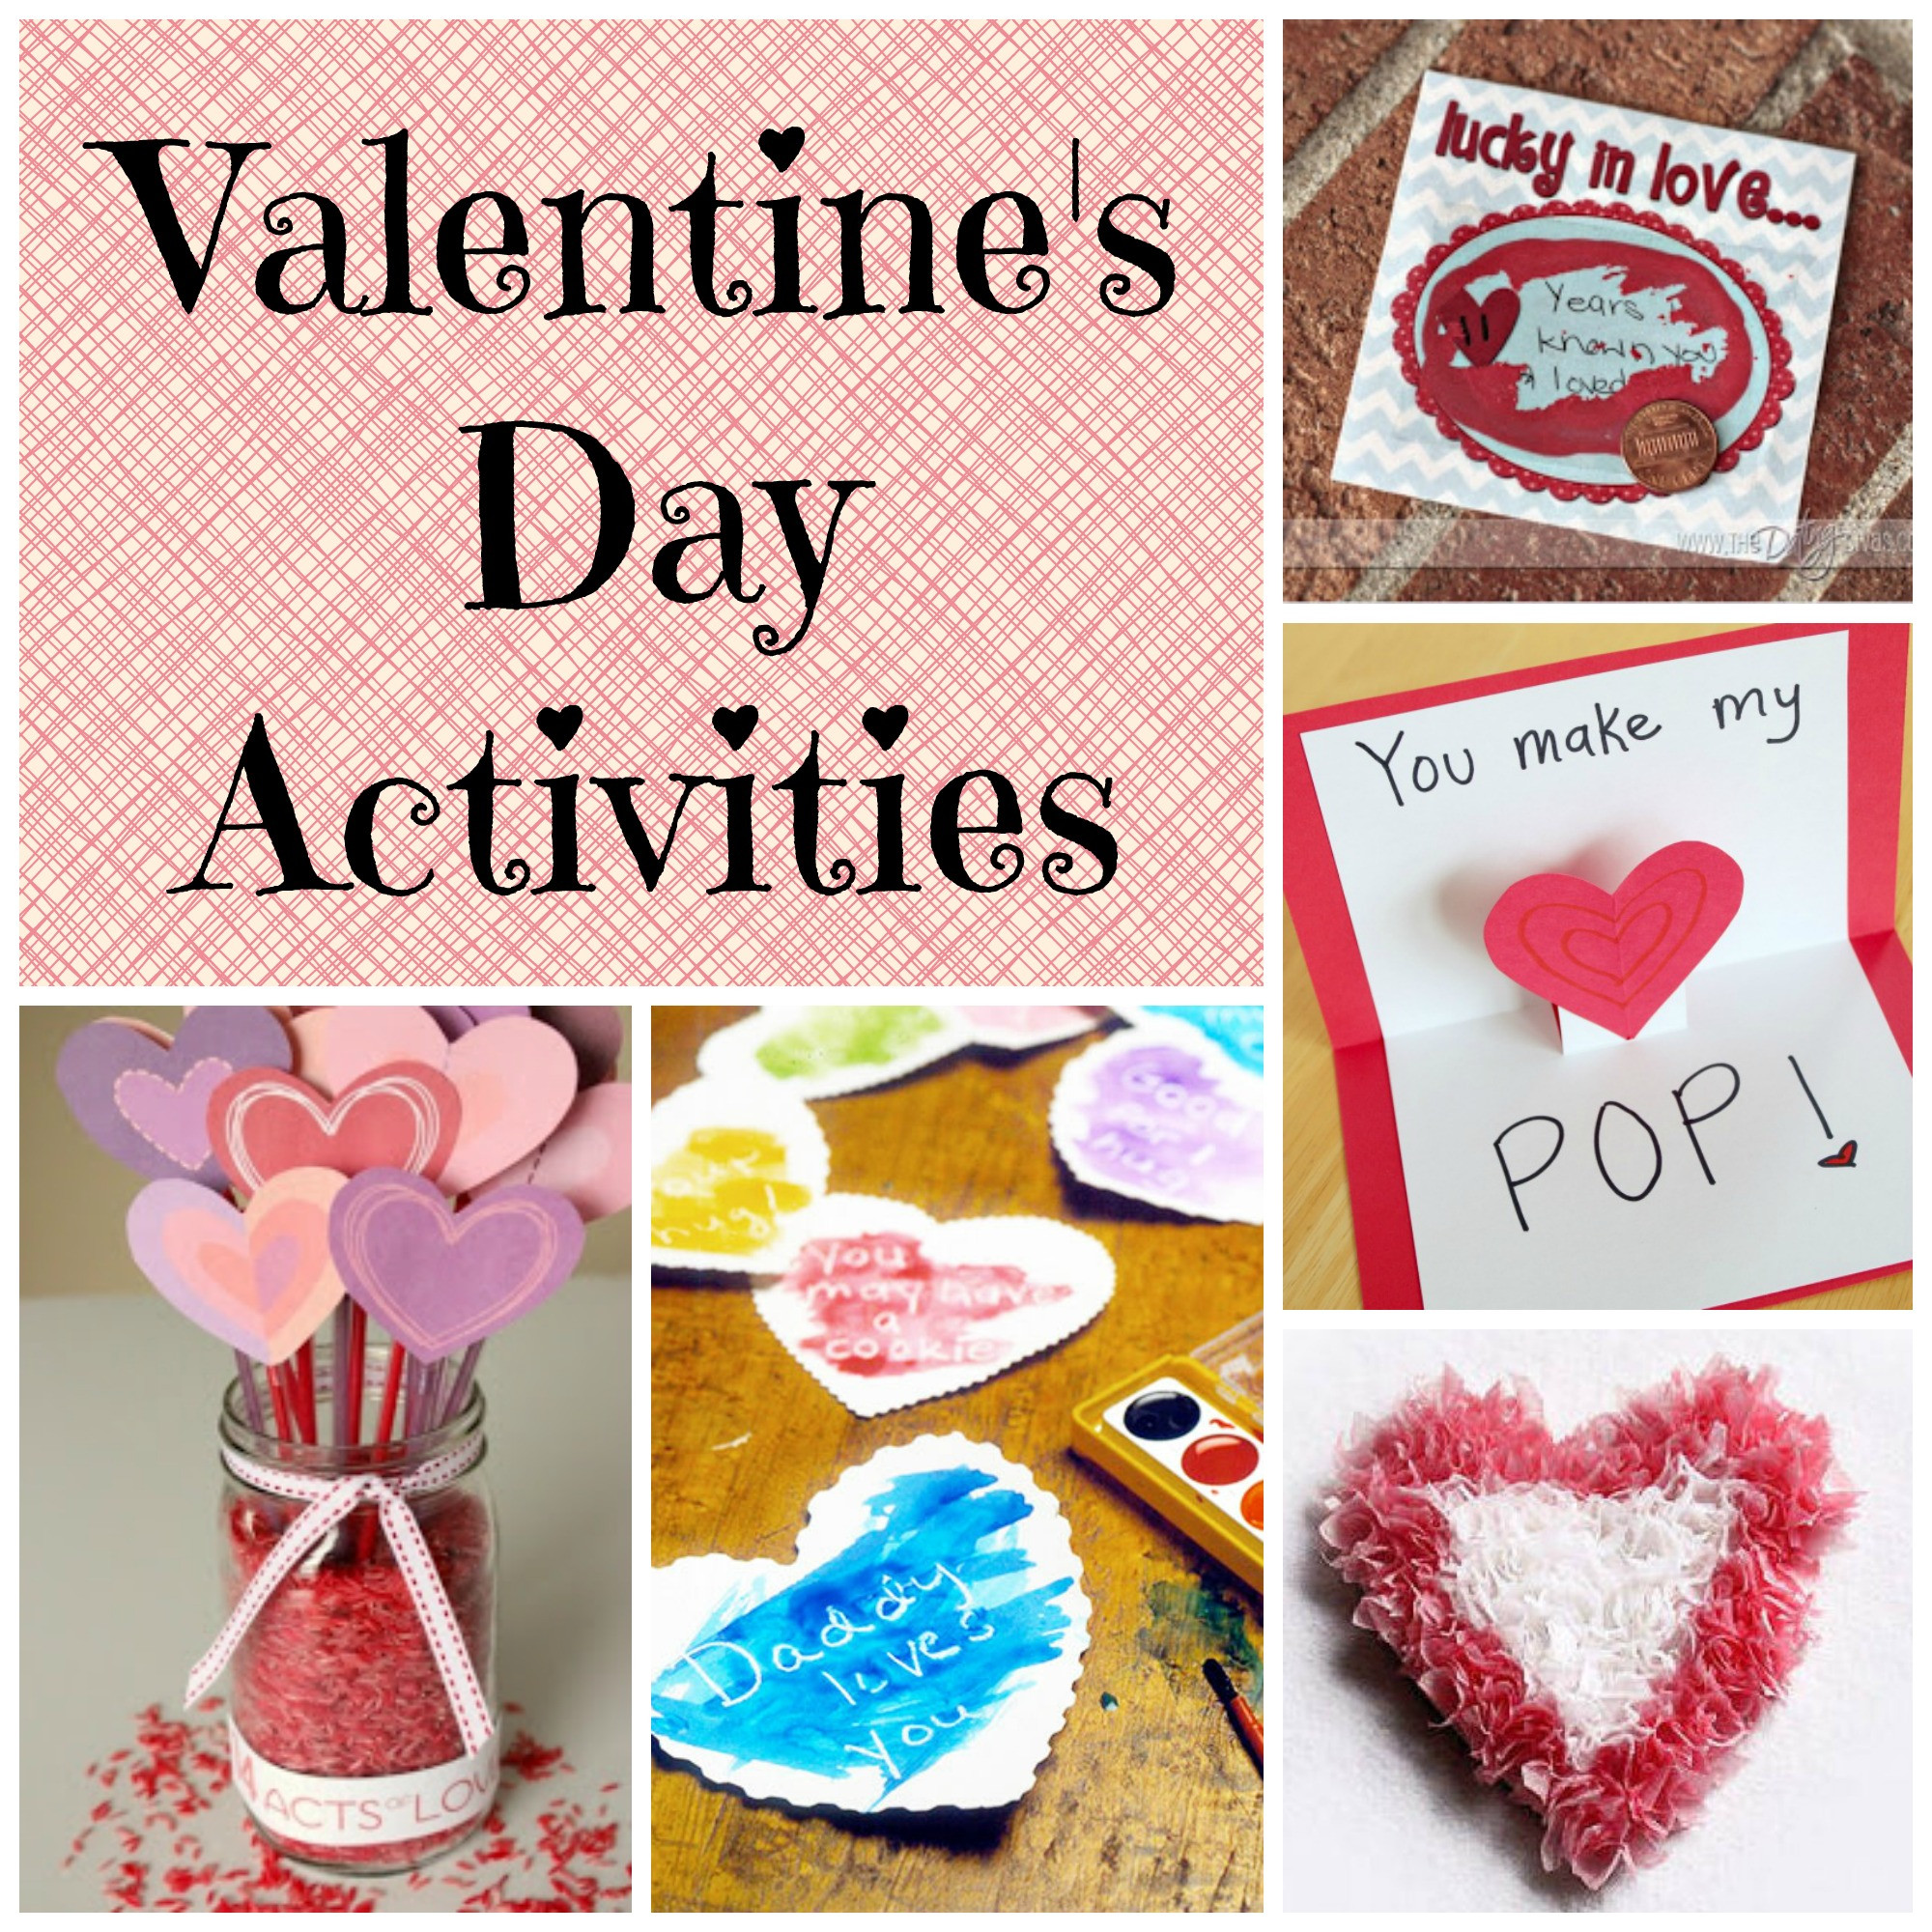 Valentines Day Activities
 Valentine s Day Activities and Ideas Saving Cent by Cent